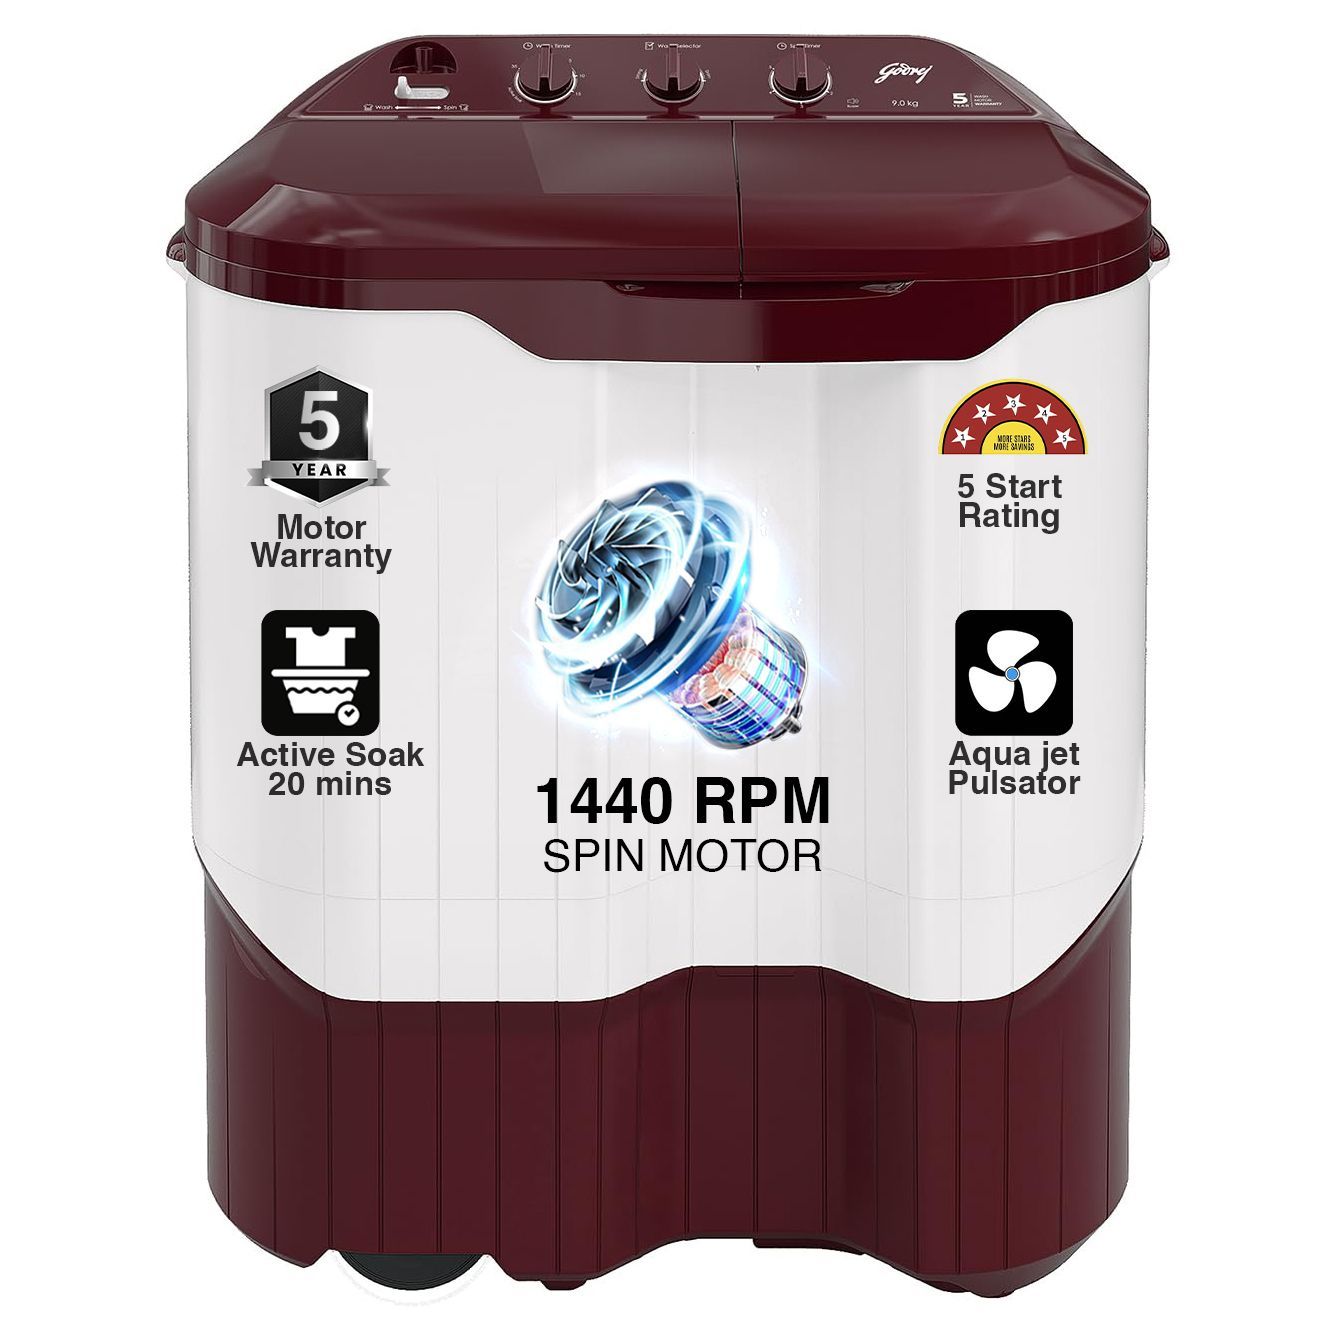 Godrej 9 Kg 5 Star Active Soak Technology Semi-Automatic Top Load Washing Machine (WS EDGEPRO 90 5.0 PPB3 WNRD, Wine Red, With Rain Shower Spin)